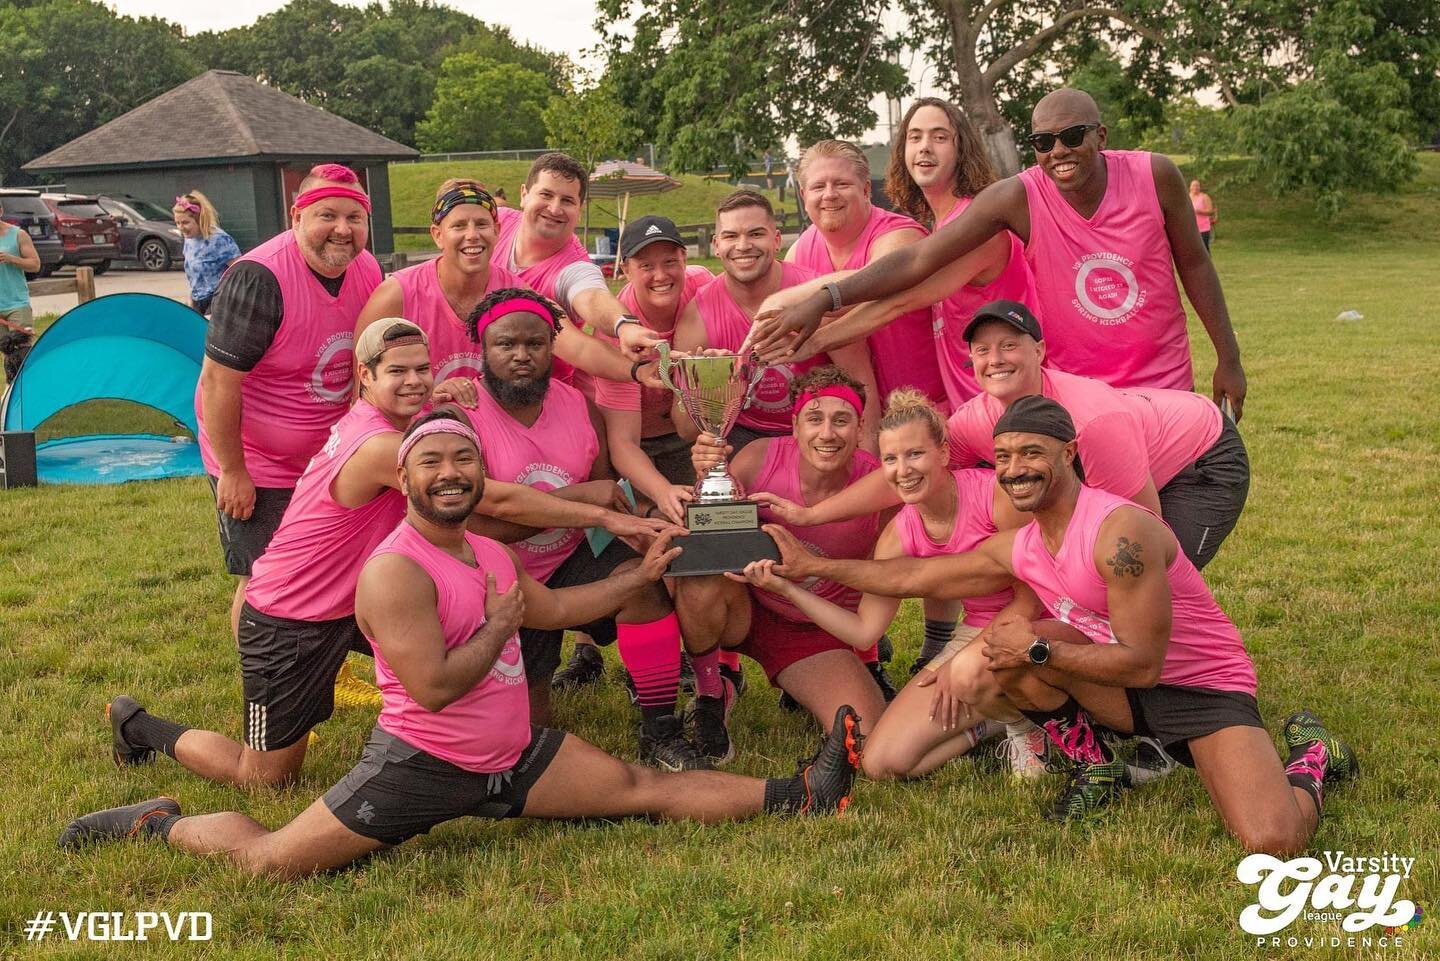 Congrats to the Spring Kickball Champions, Oops! I Kicked it Again!! #FreeBritney

Will they take the trophy again this summer?! Today is your last day to register for Hot Kickball Summer! Link in bio!
#gaykickball #gaysports #kickball #gayprovidence